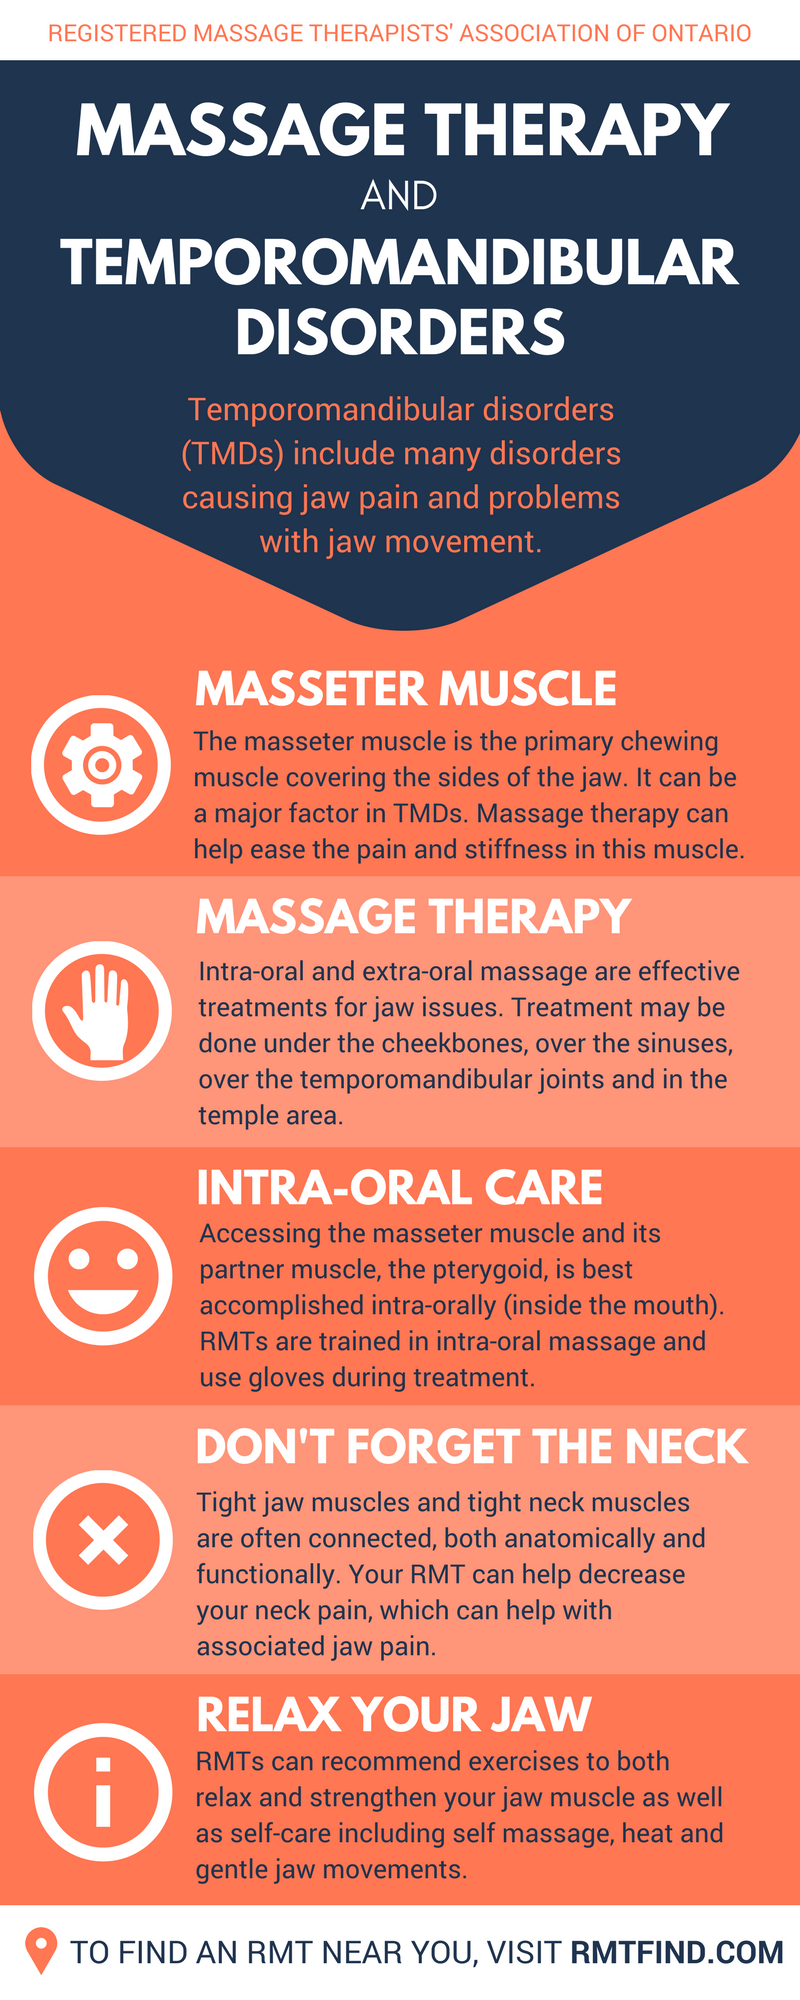 https://www.rmtfind.com/Media/Default/Blog%20Images/Massage%20Therapy%20for%20TMD.png